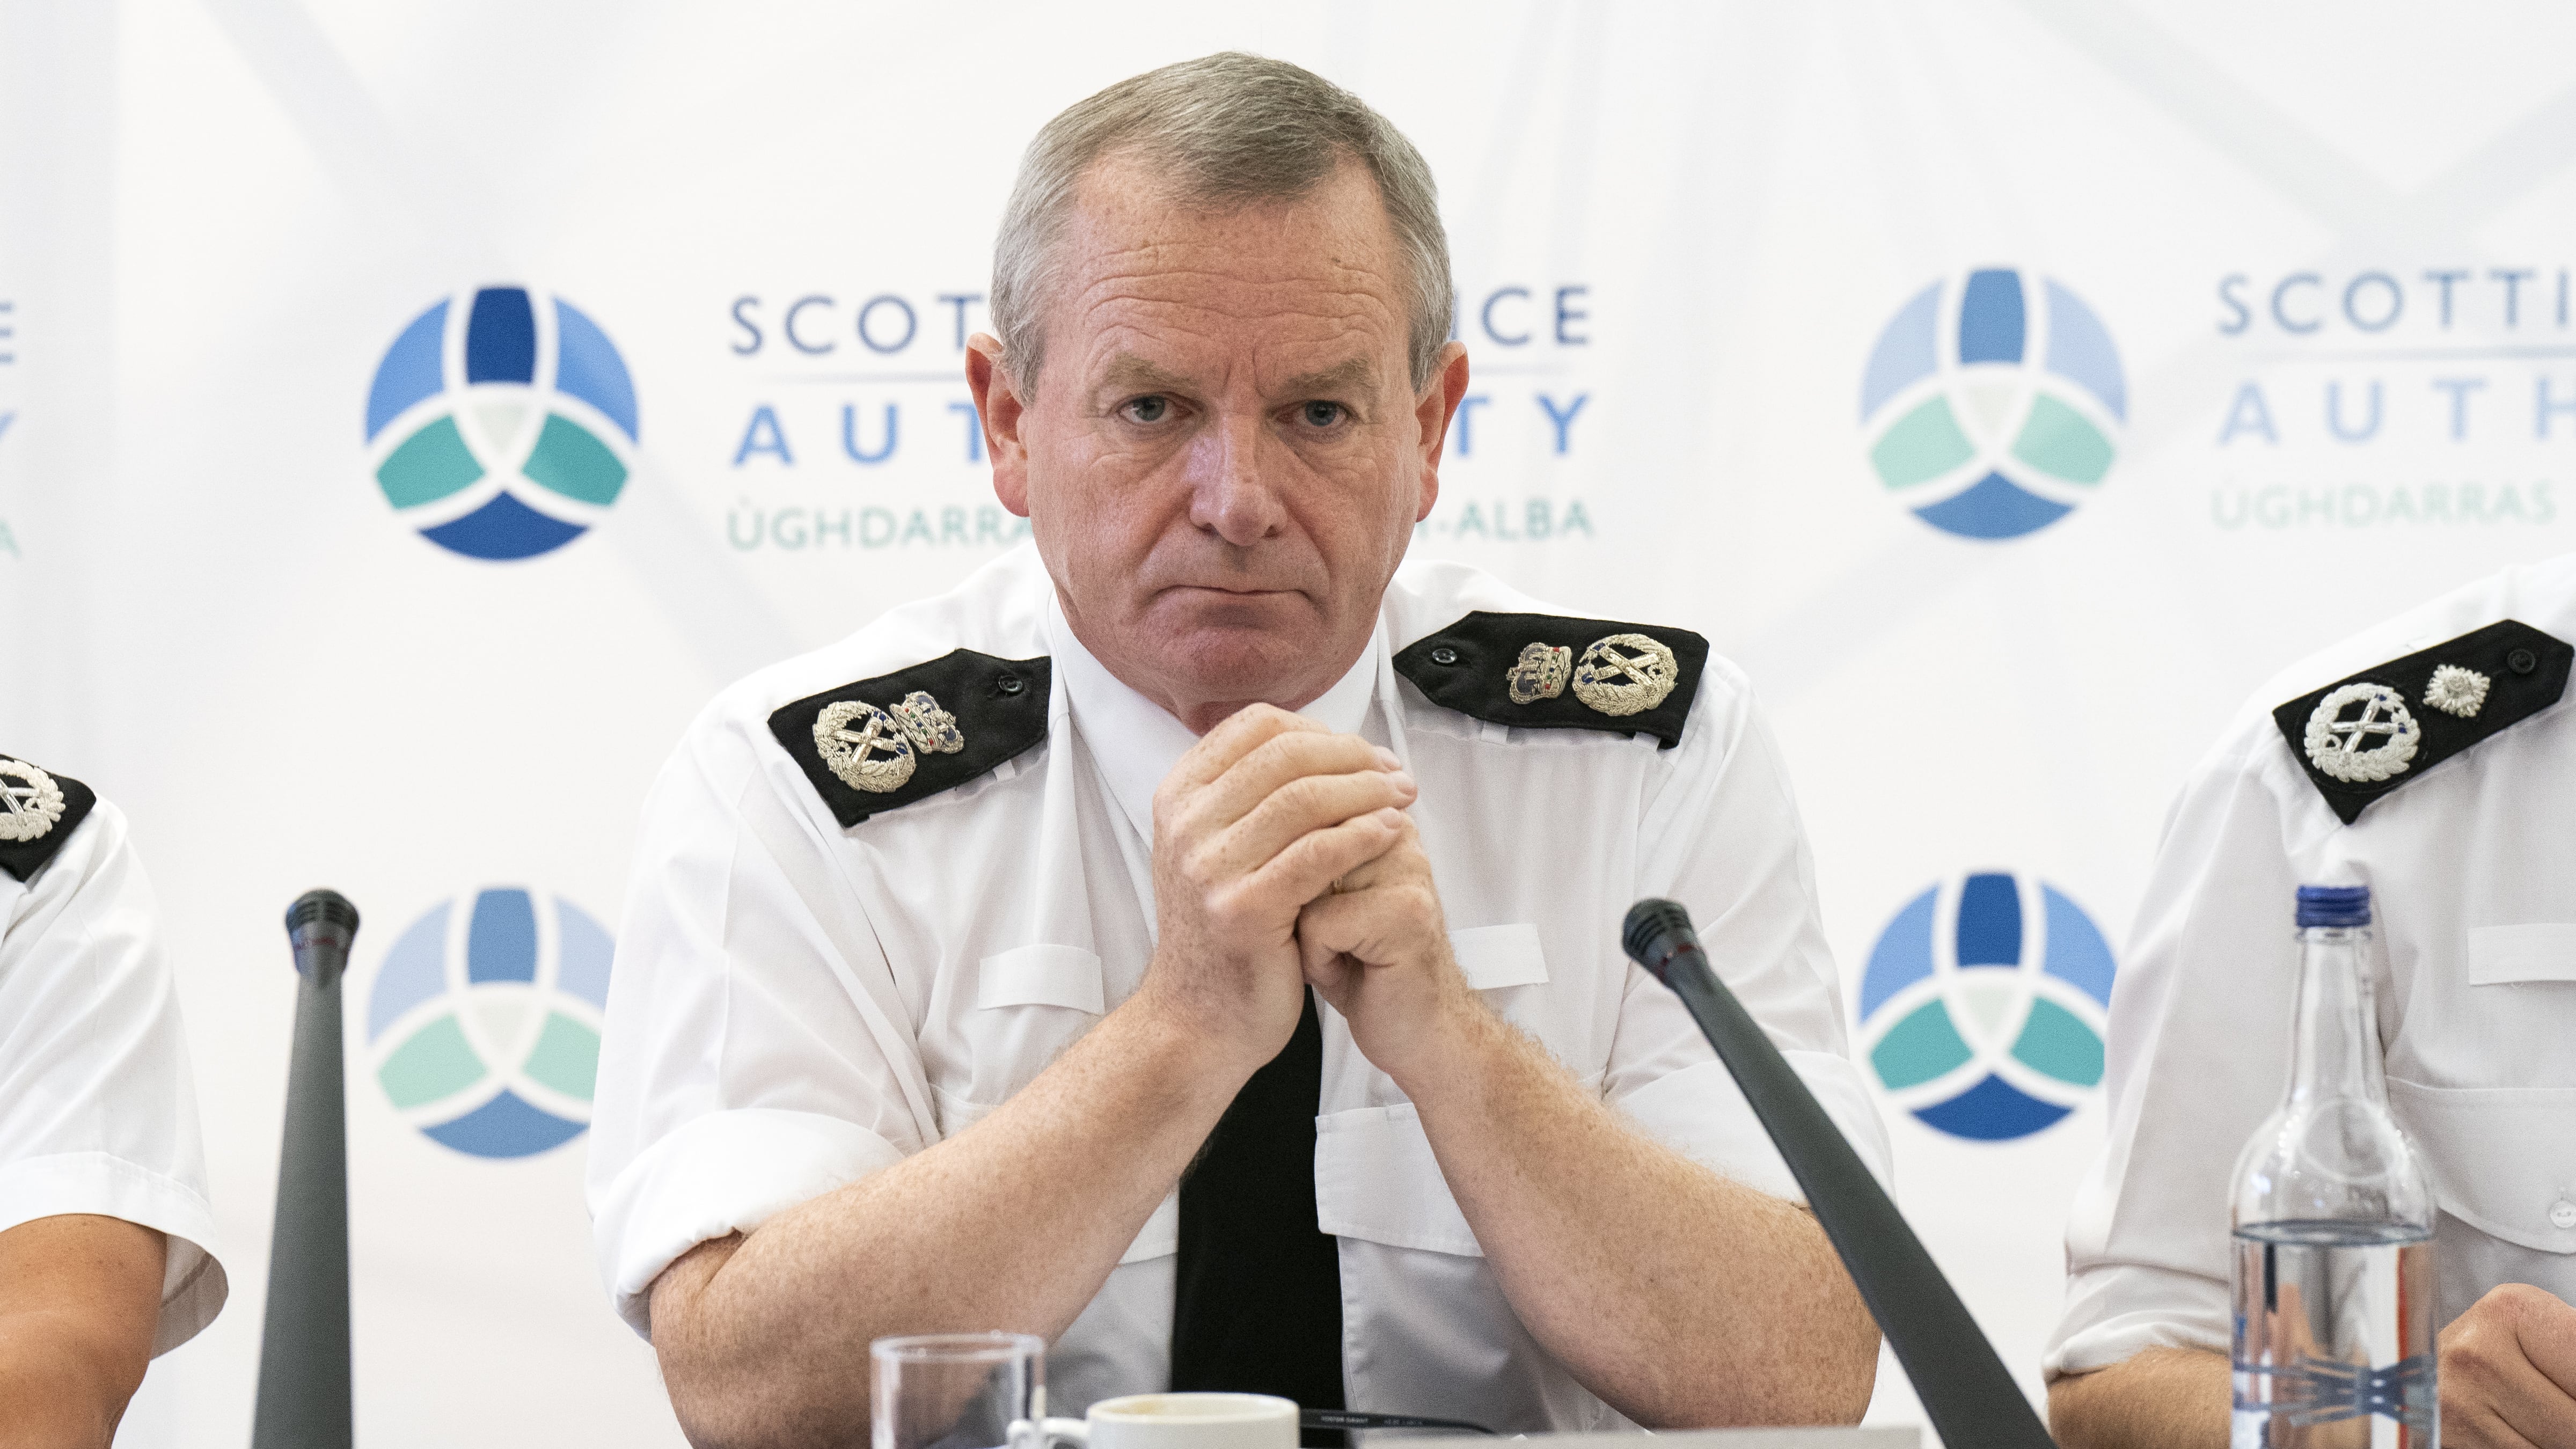 Sir Iain Livingstone has said the reaction to his claim that Police Scotland was ‘institutionally racist’ showed it was right